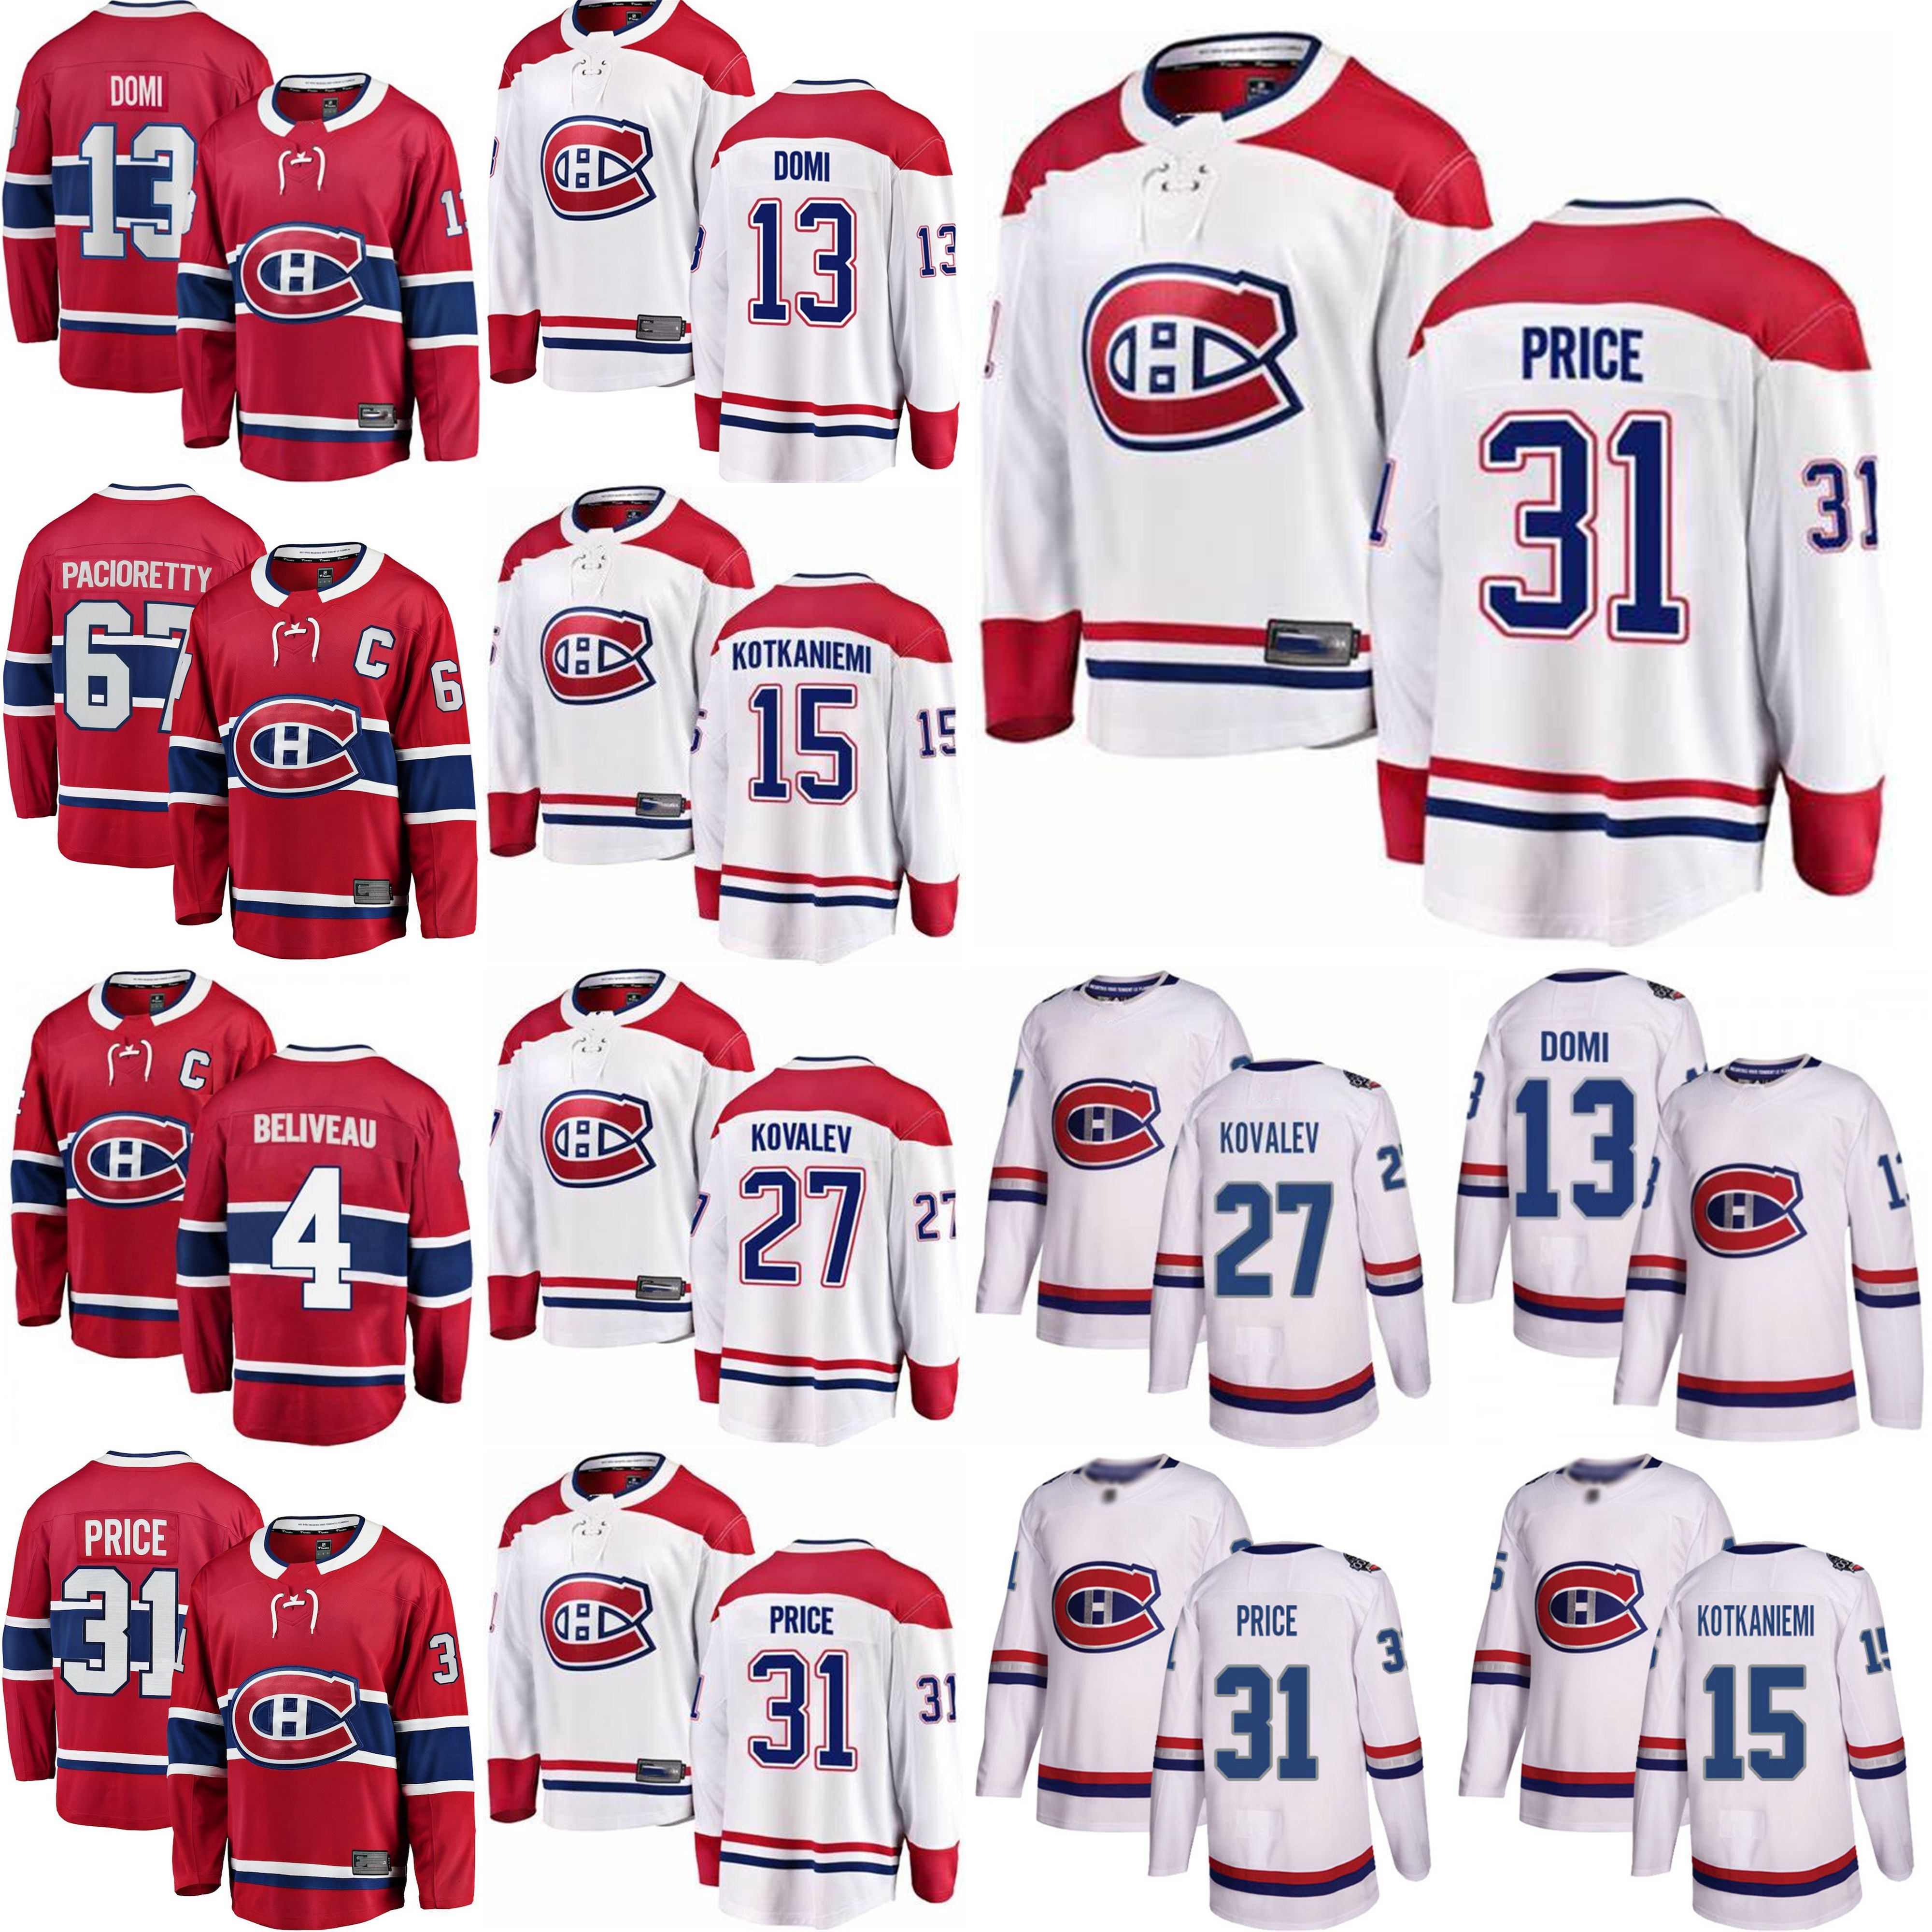 montreal canadiens max pacioretty jersey